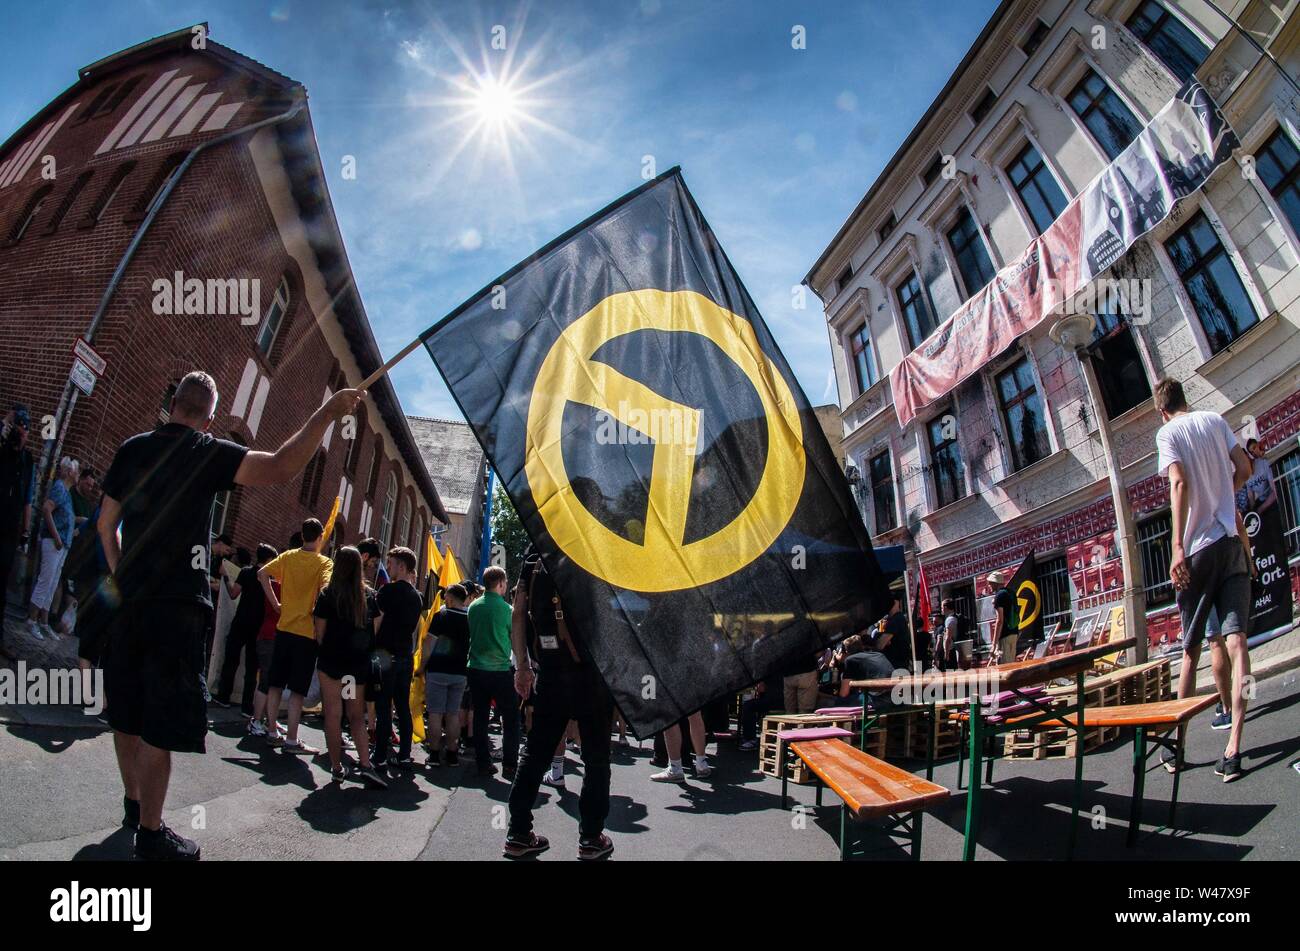 Halle Saale, Sachsen Anhalt, Germany. 20th July, 2019. Amid protests, the white supremacist, right extremist Identitaere Bewegung (Generation Identity, Identitaren Movement) held a rally in Halle (Saale). The Identitaere have recently faced numerous challenges, including raids to explore the connection of its head Martin Sellner to the Christ Church shooter, as well as in Germany where the IB was officially classified as 'right-extremist''. The group has renewed the use of the 'blood and soil'' (Blut und Boden) theories and espouses a 'great replacement'' of white people, which was Stock Photo